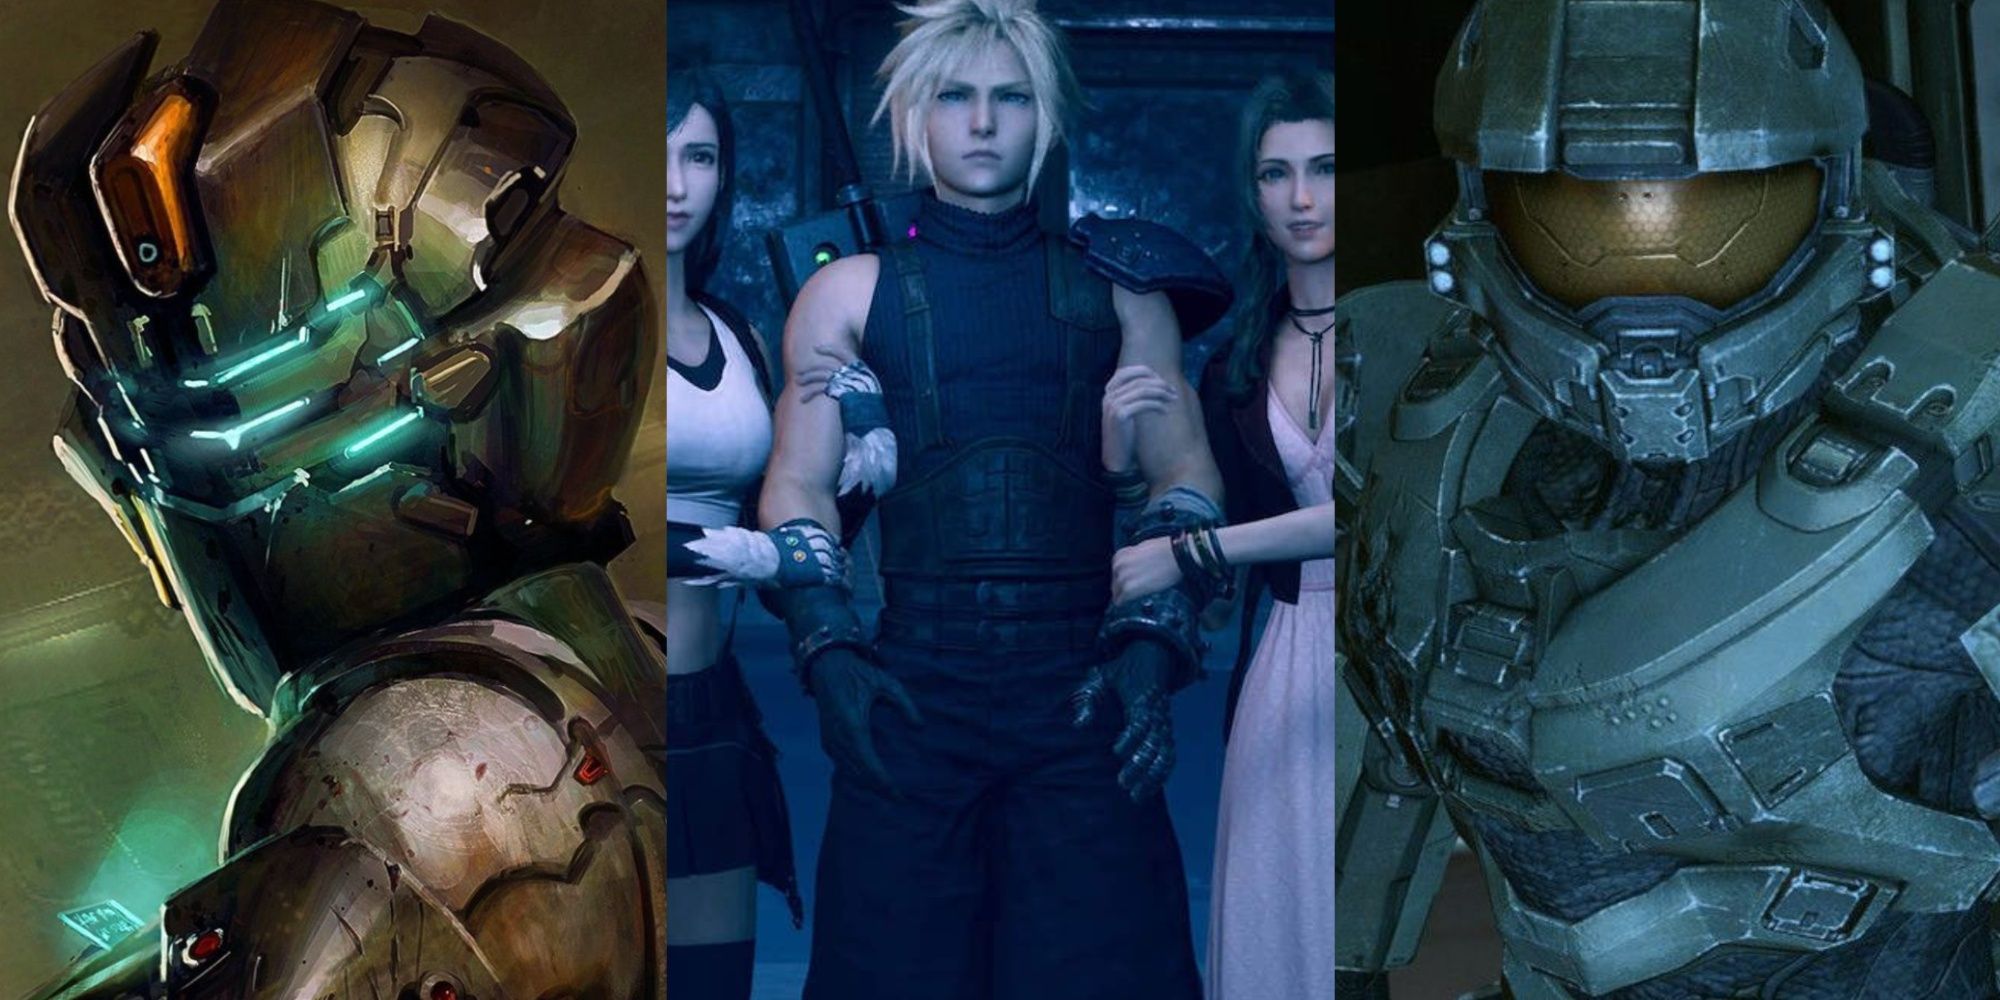 A collage showing the progatonists of Dead Space, Final Fantasy VII Remake, and Halo 4.